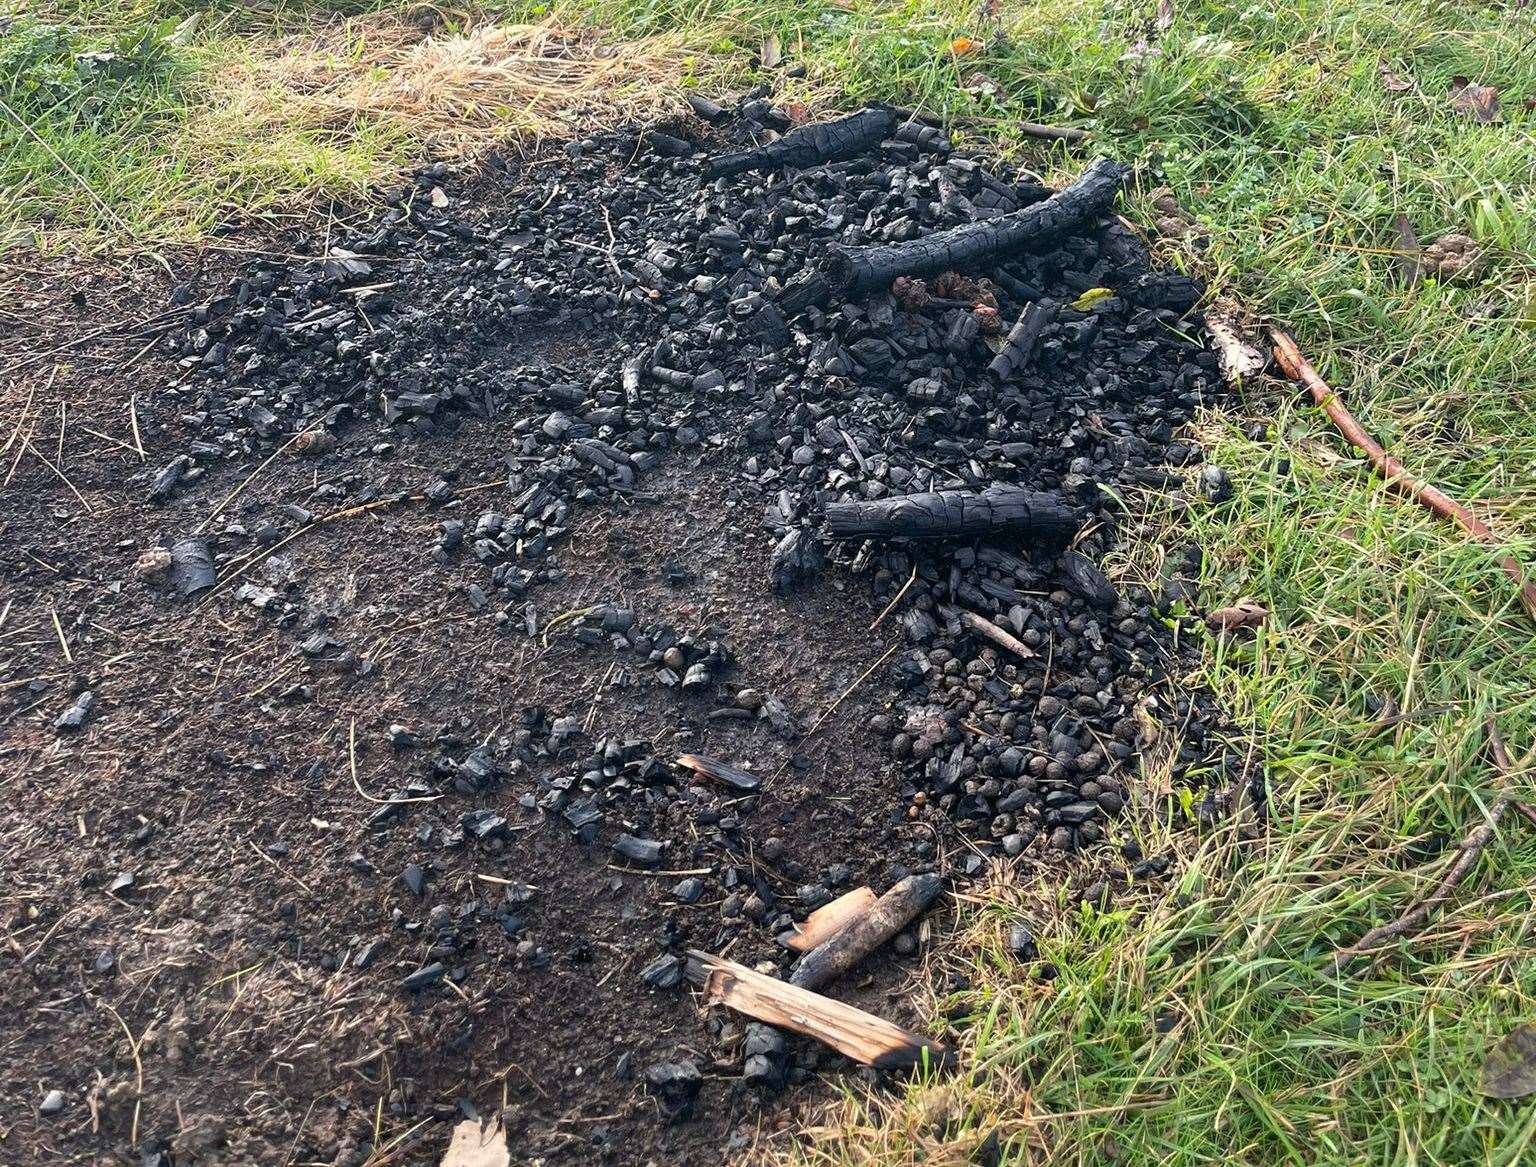 The aftermath of a bonfire at Blue Bell Hill. Photo: Alison Ruyter